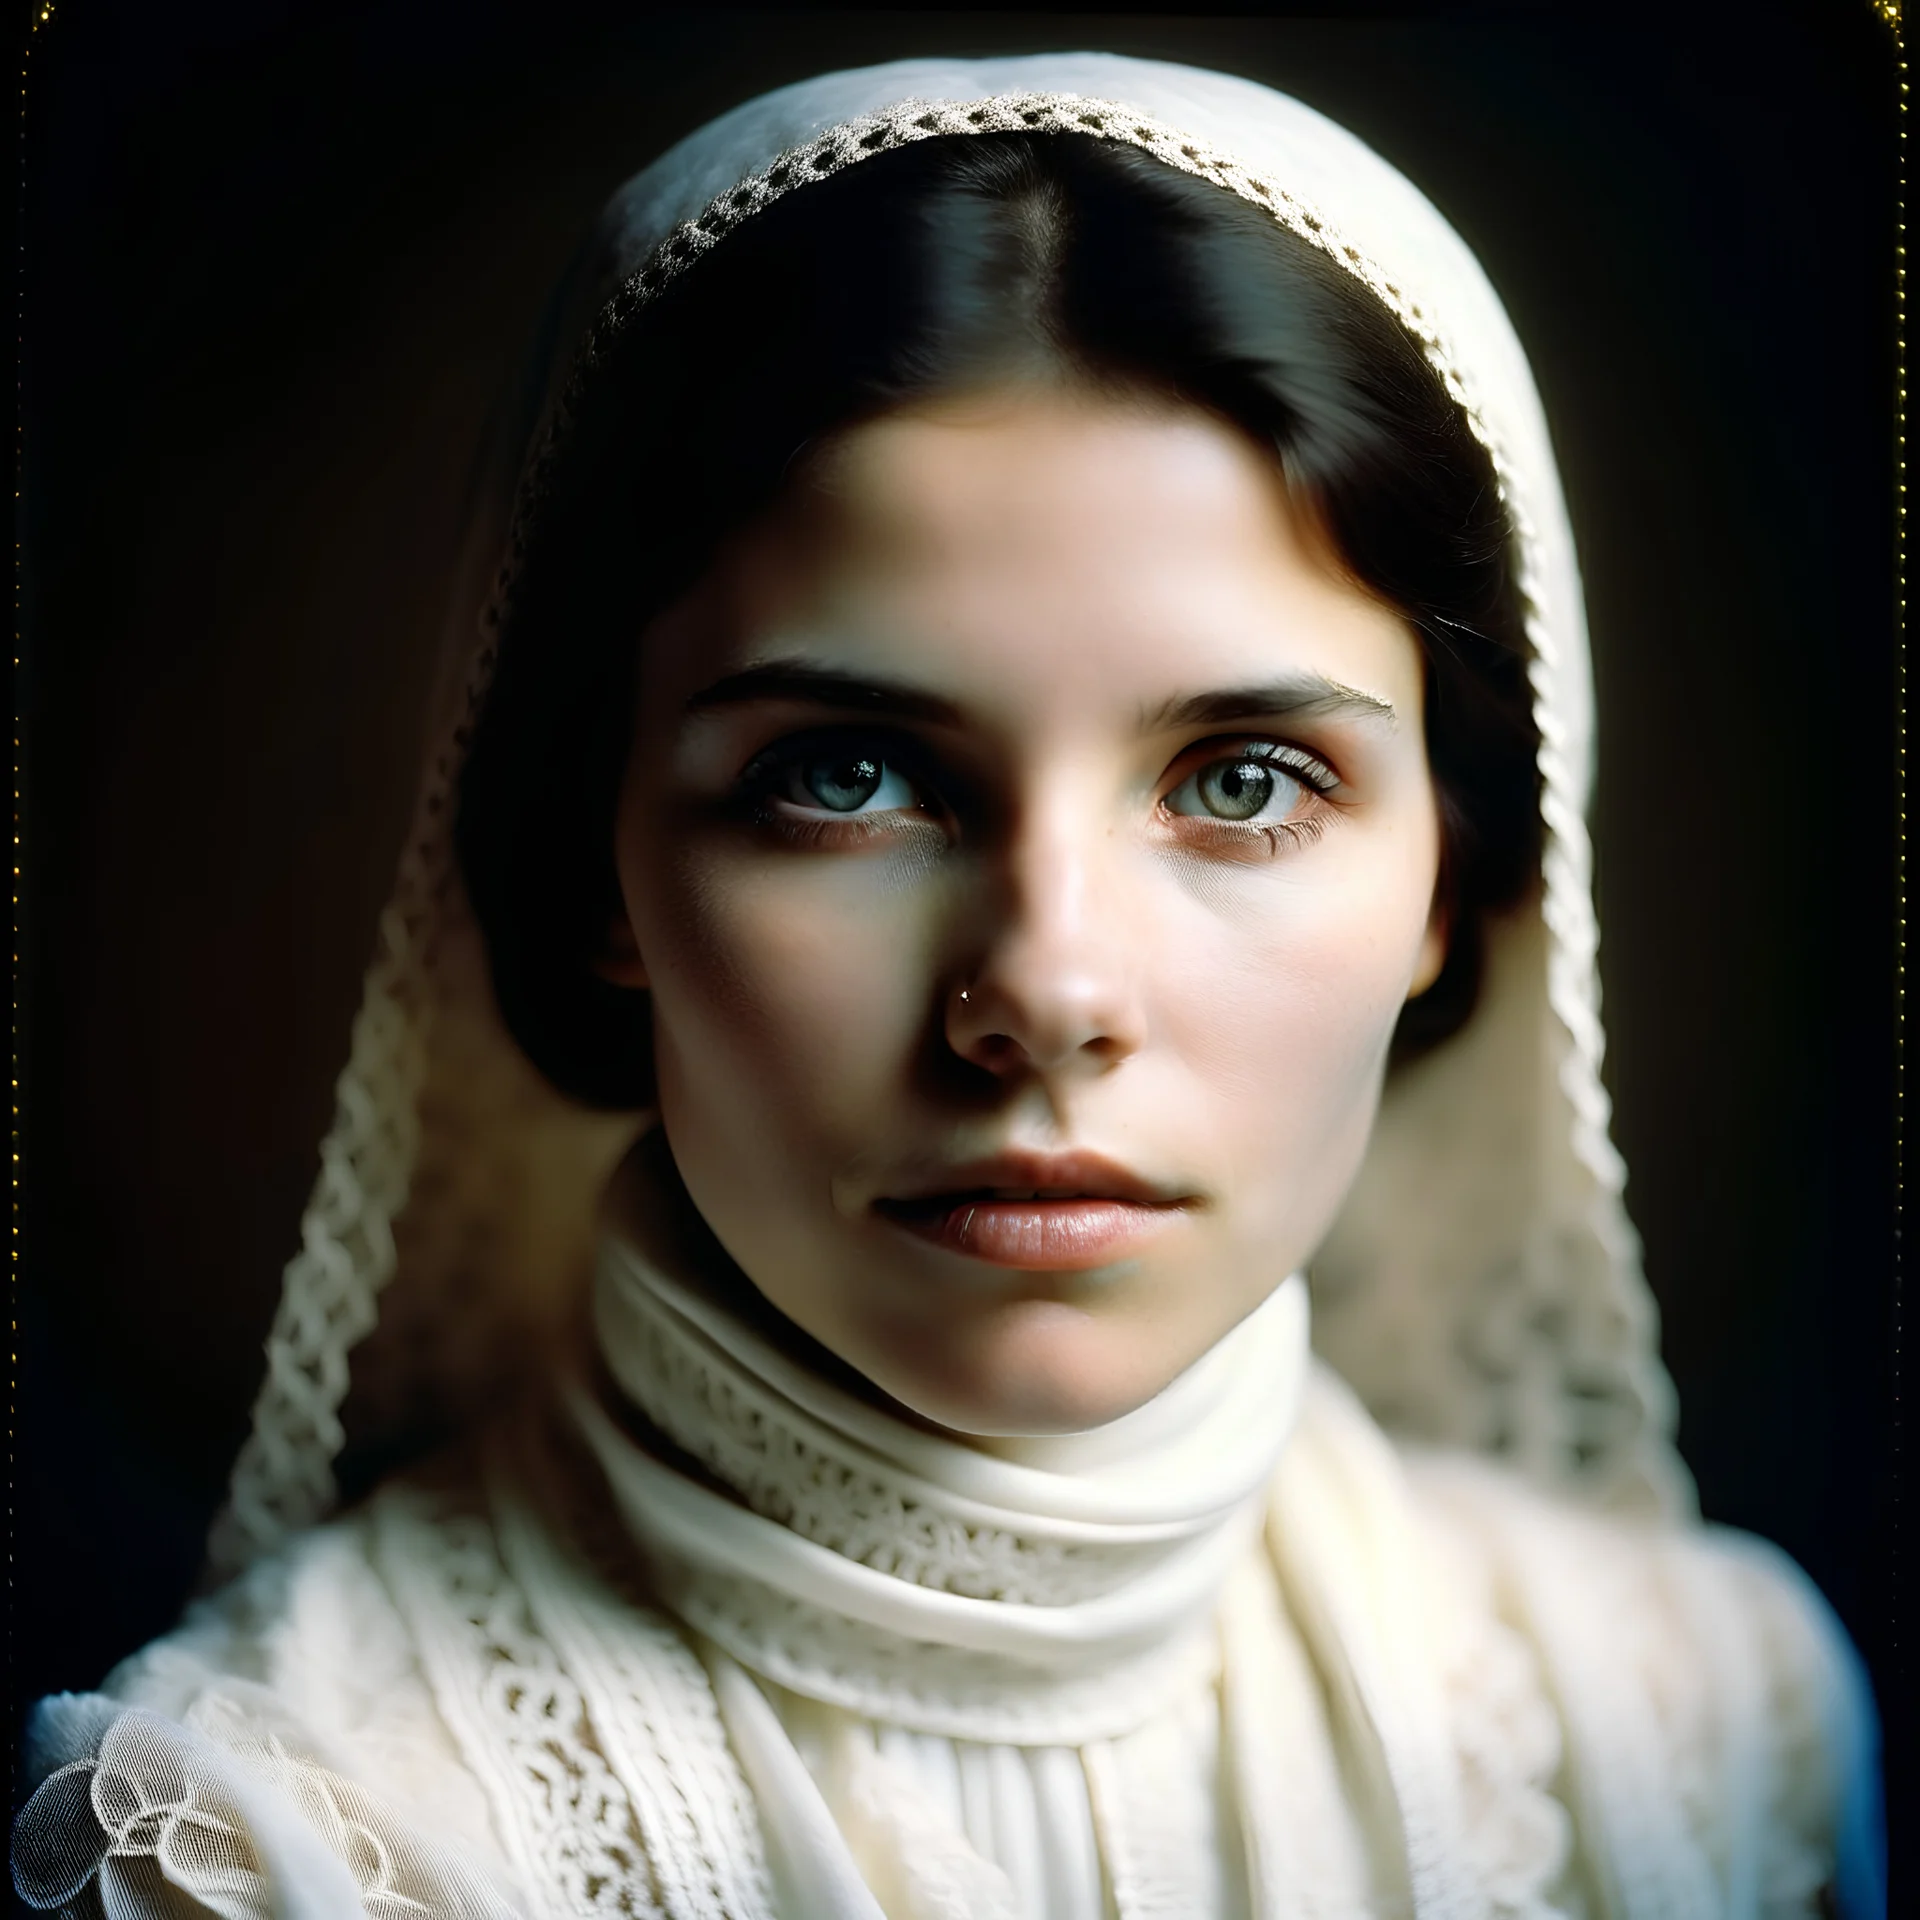 a color portrait of a beautiful woman with dark hair, mysterious brown eyes and a pale complexion, she looks at the camera a little off center, she wears a white lace scarf placed carefully across her head and it falls gently down to her shoulders, she is dressed in a high necked long sleeved white dress, with rows of tiny lace covered buttons, f8 150 Sonnar lens on a Hasselblad 500 CM, the lighting falls perfectly across her face --style raw